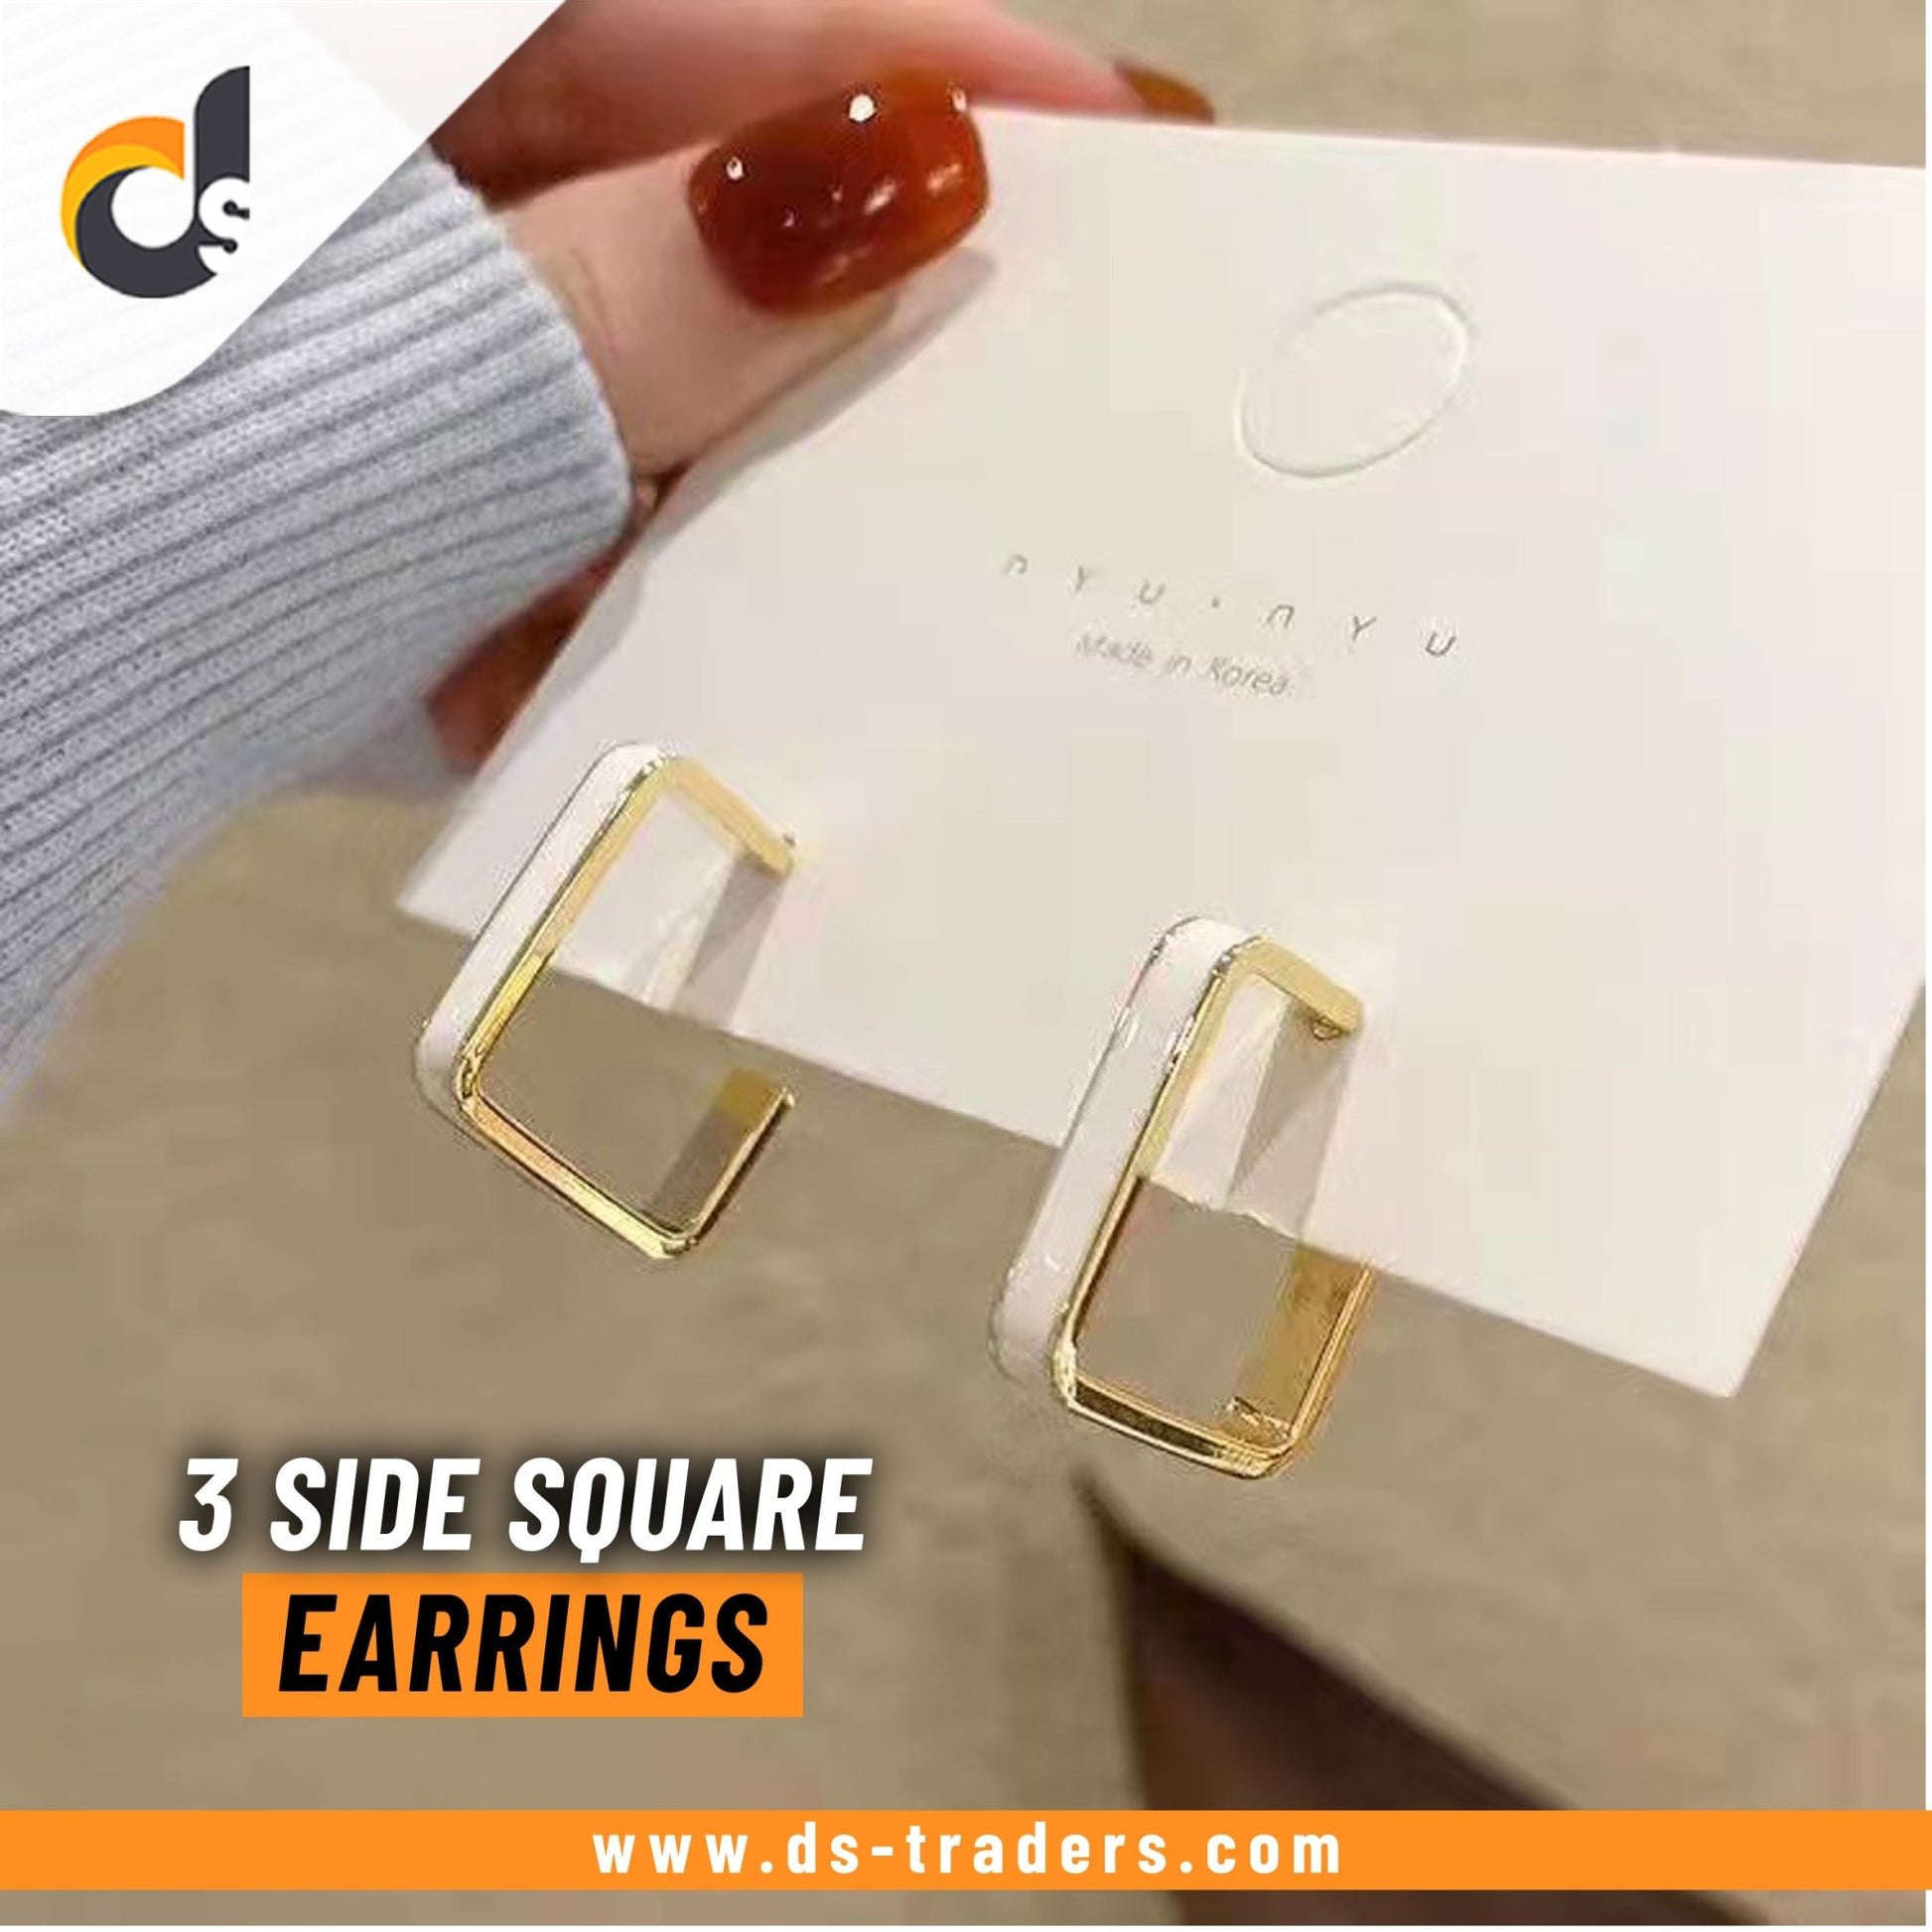 3 Side Square Earrings - DS Traders